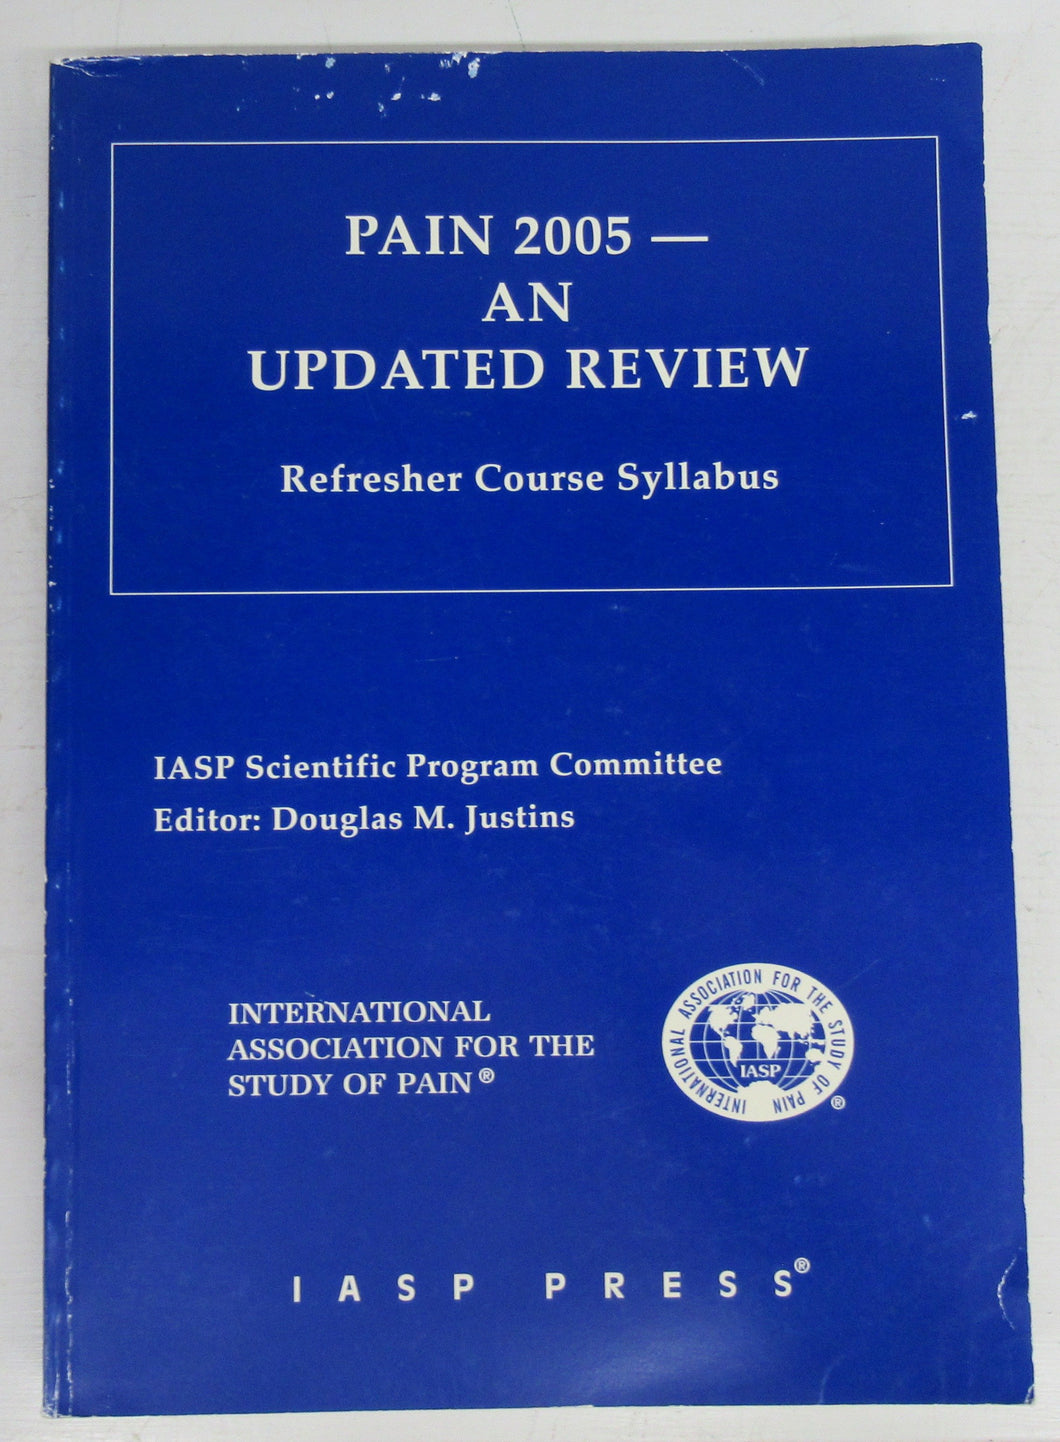 Pain 2005 - An Updated Review. Refresher Course Syllabus